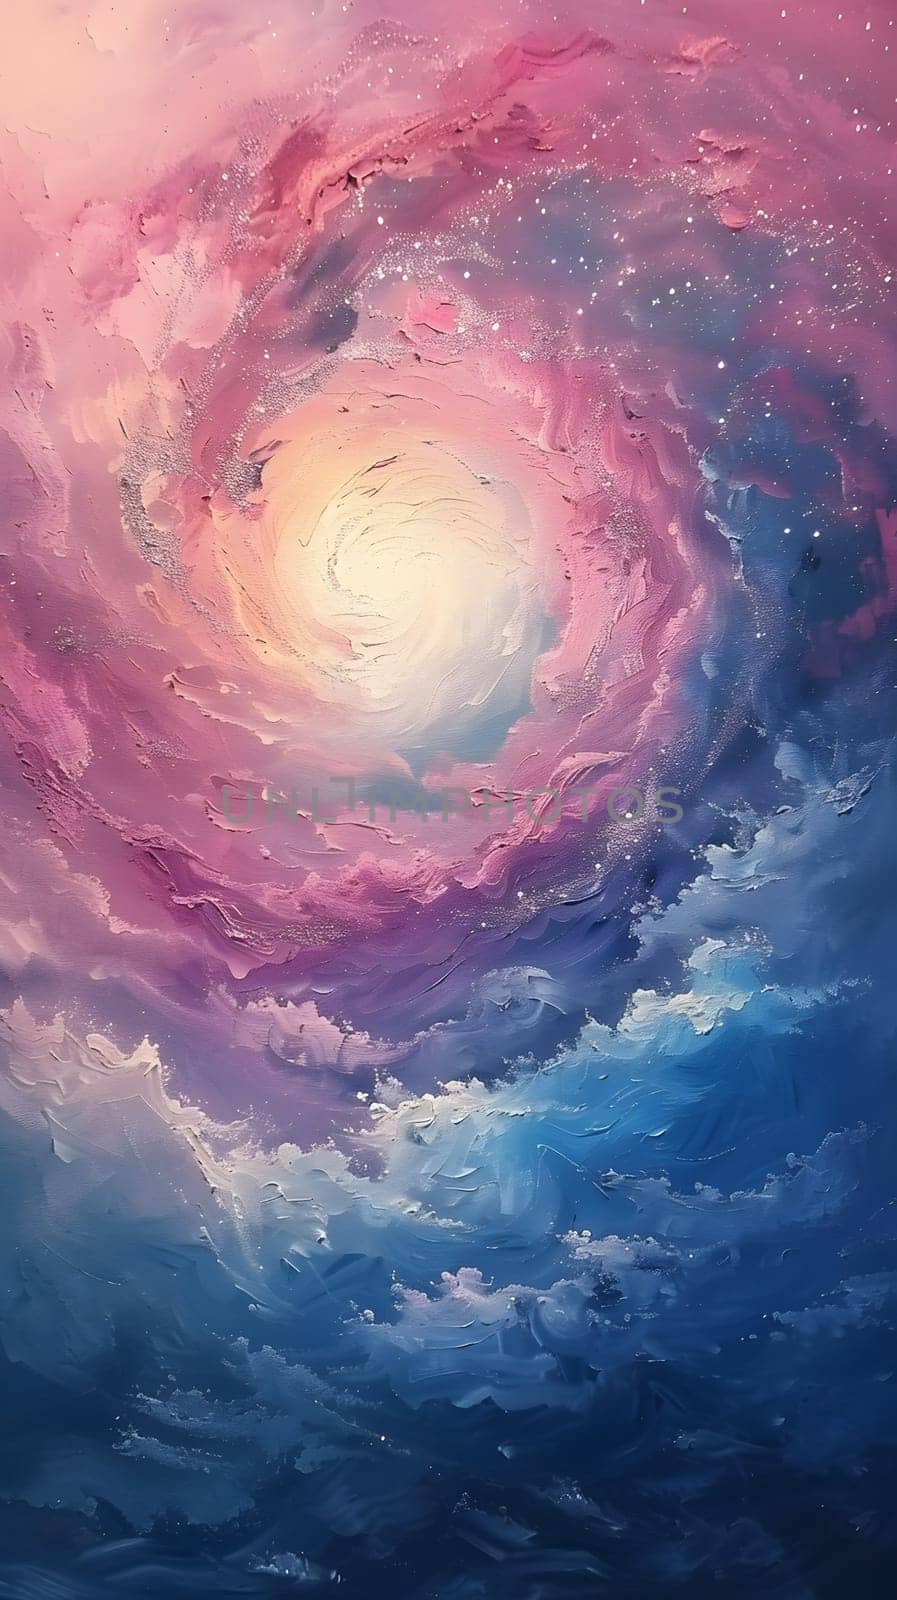 A mesmerizing painting capturing an electric blue and magenta galaxy in the sky by Nadtochiy